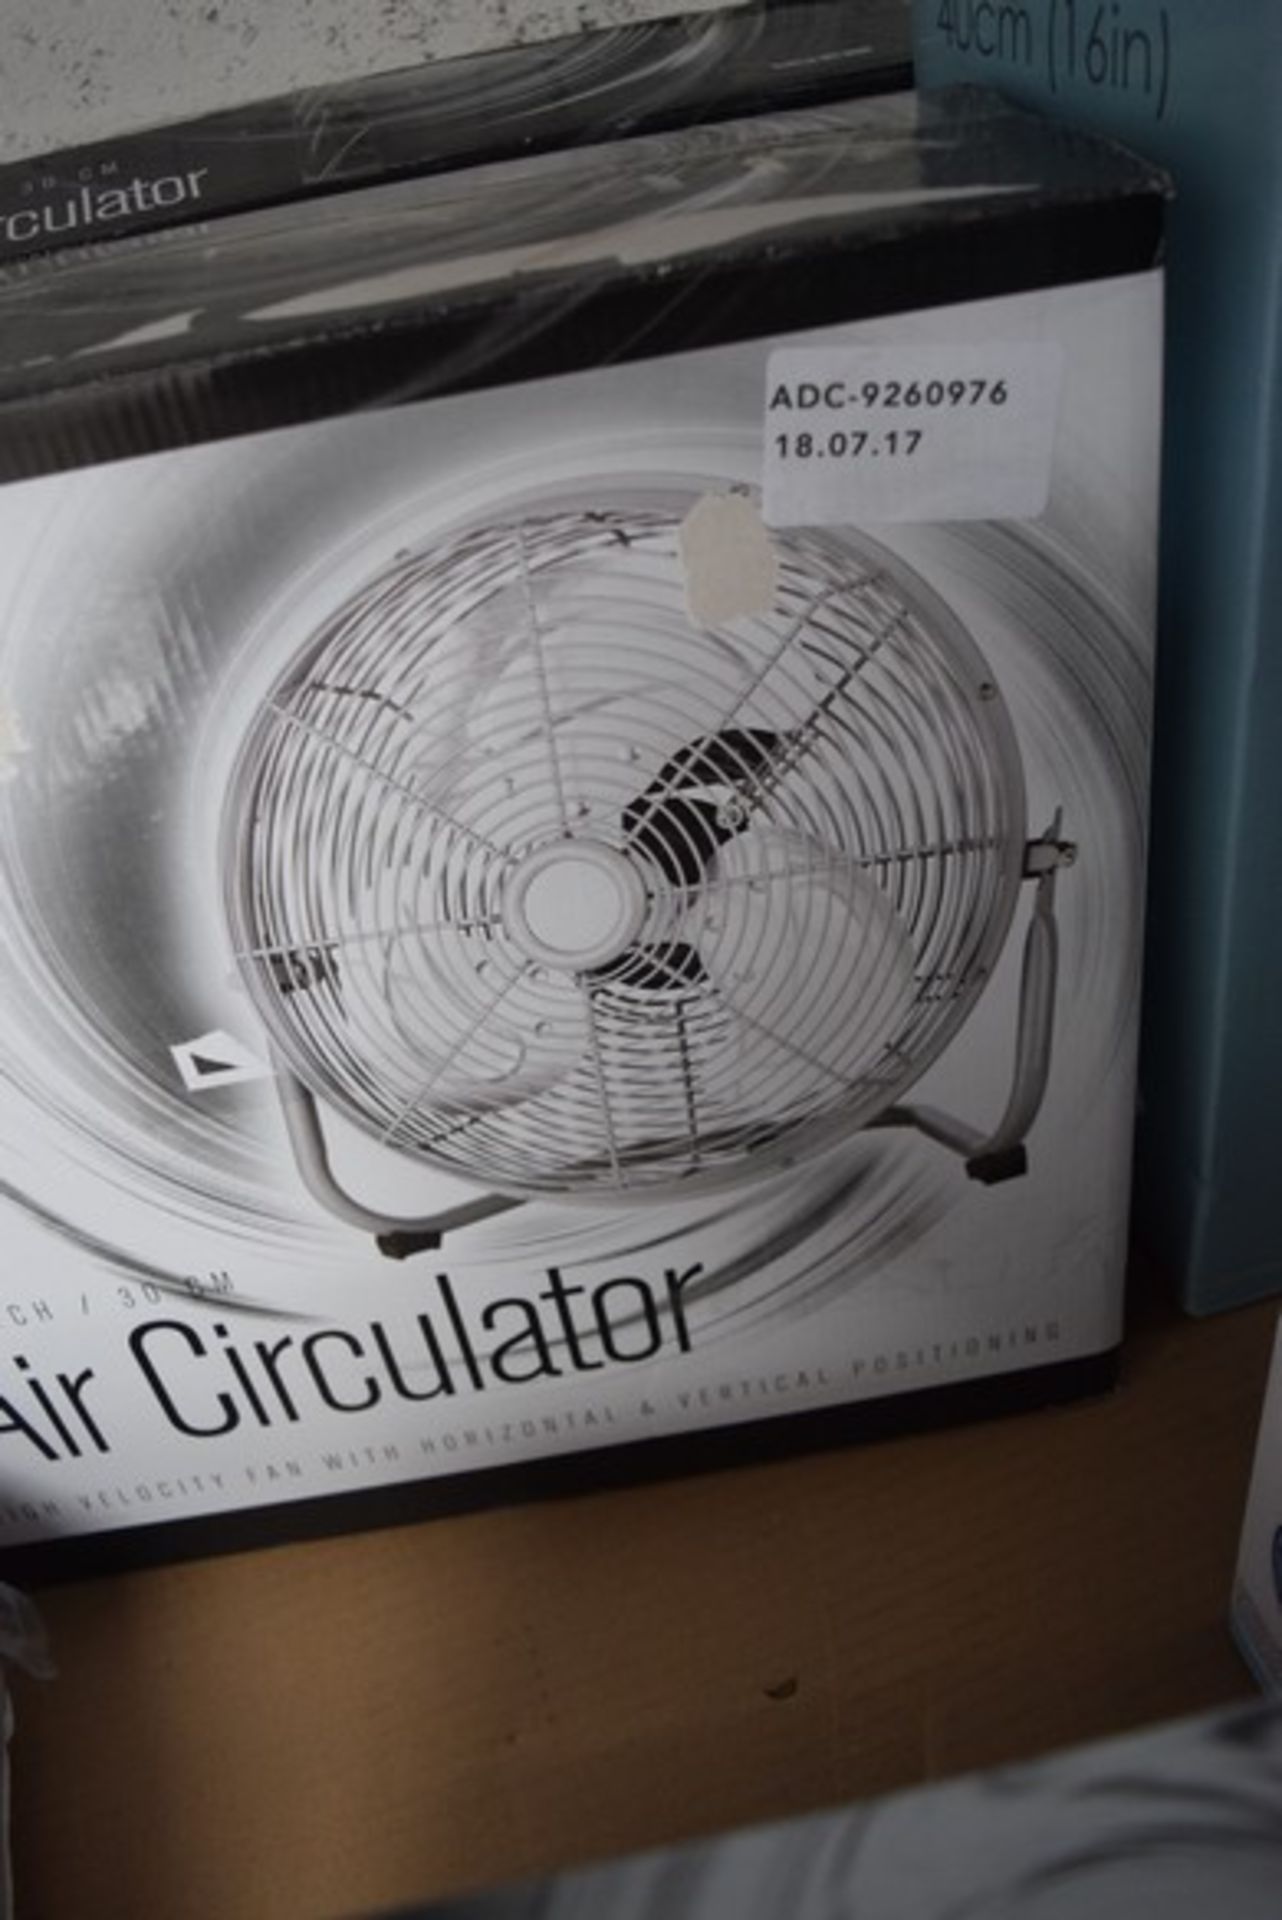 1 x BOXED AIR CIRCULATOR FAN 12 INCH RRP £35 18.07.17 *PLEASE NOTE THAT THE BID PRICE IS